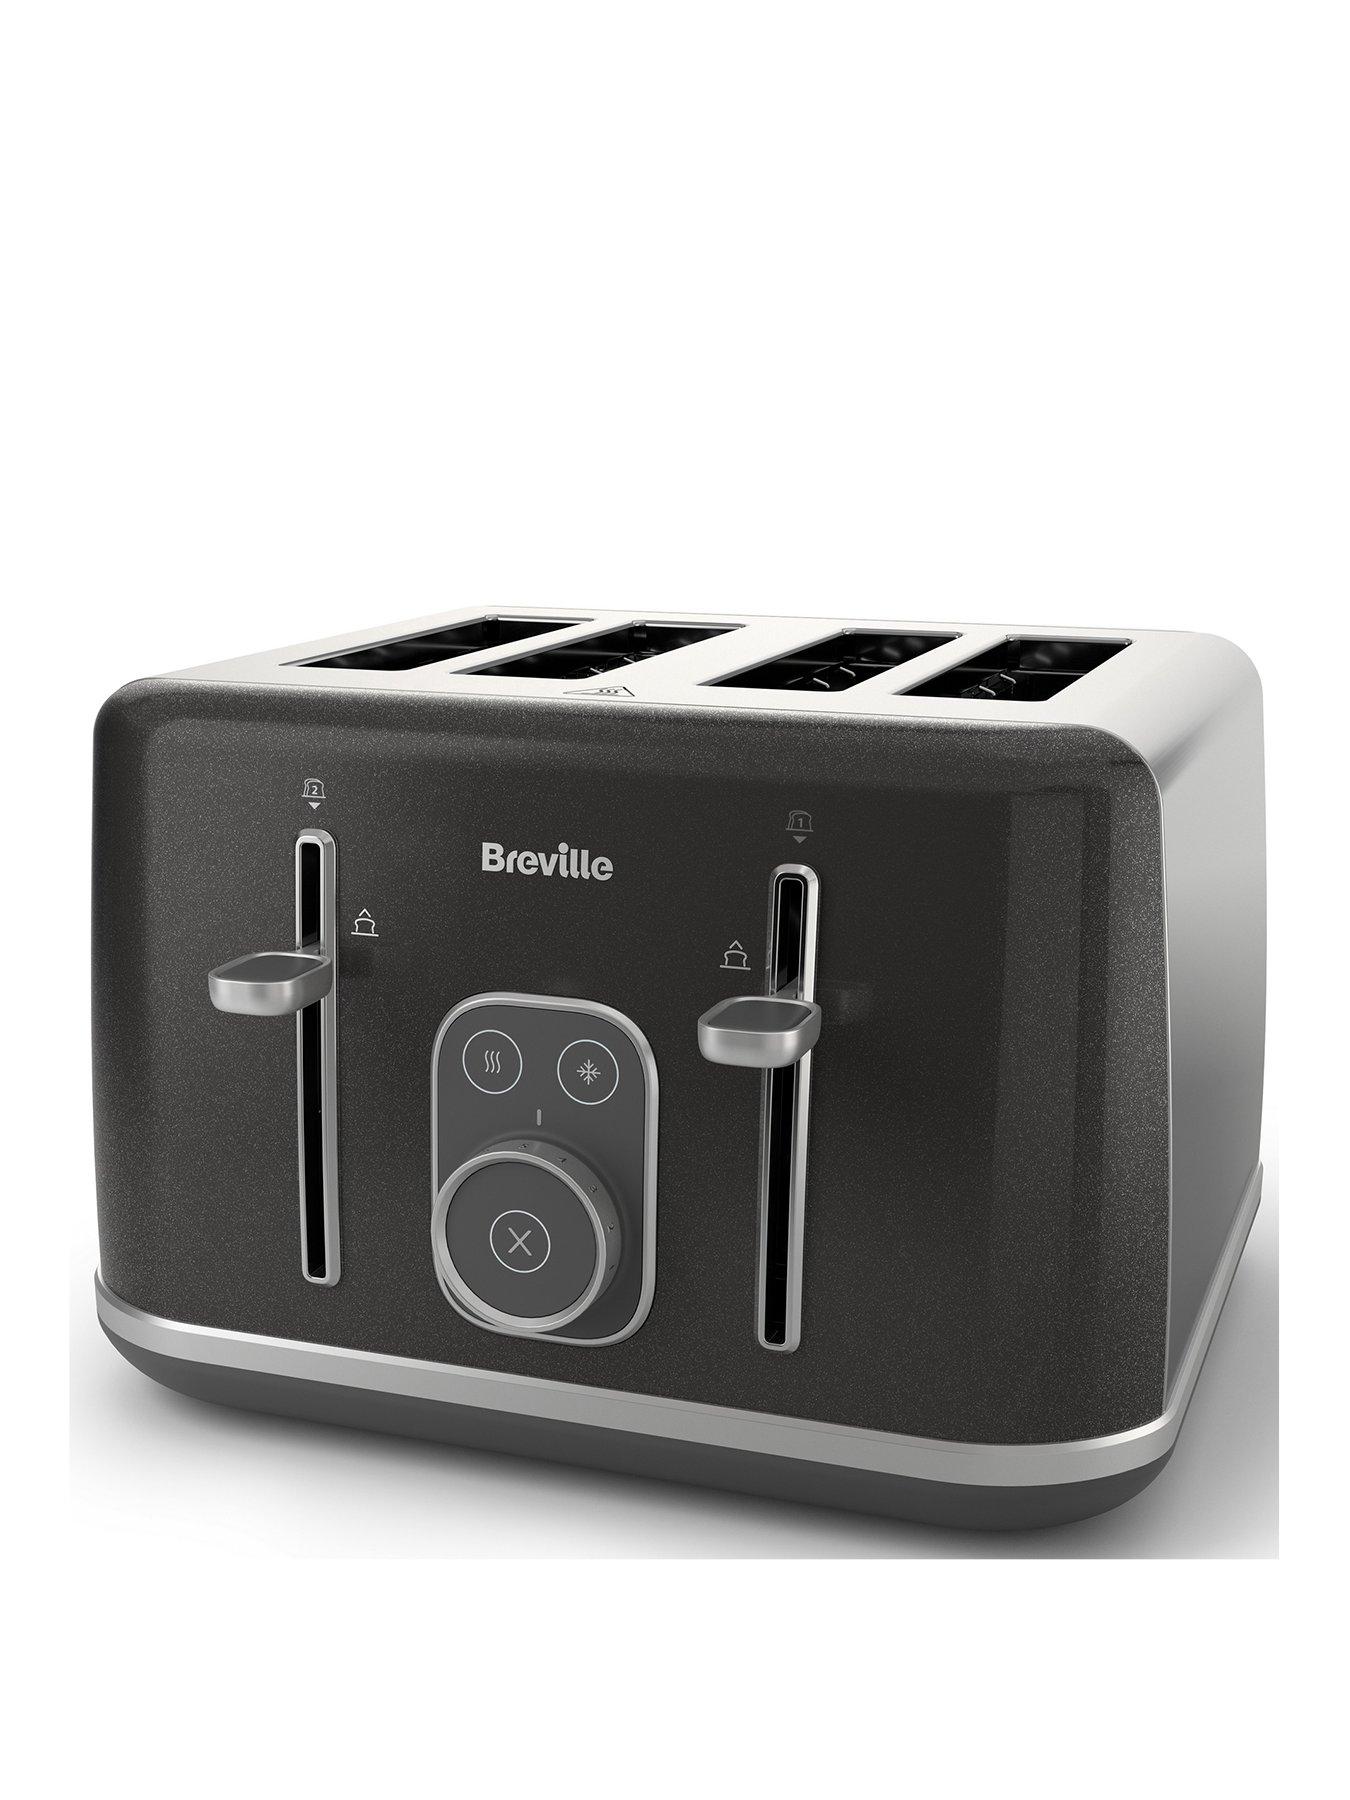 Breville Bold Kettle and Toaster Set Grey Kettle & 2 Slice Toaster New